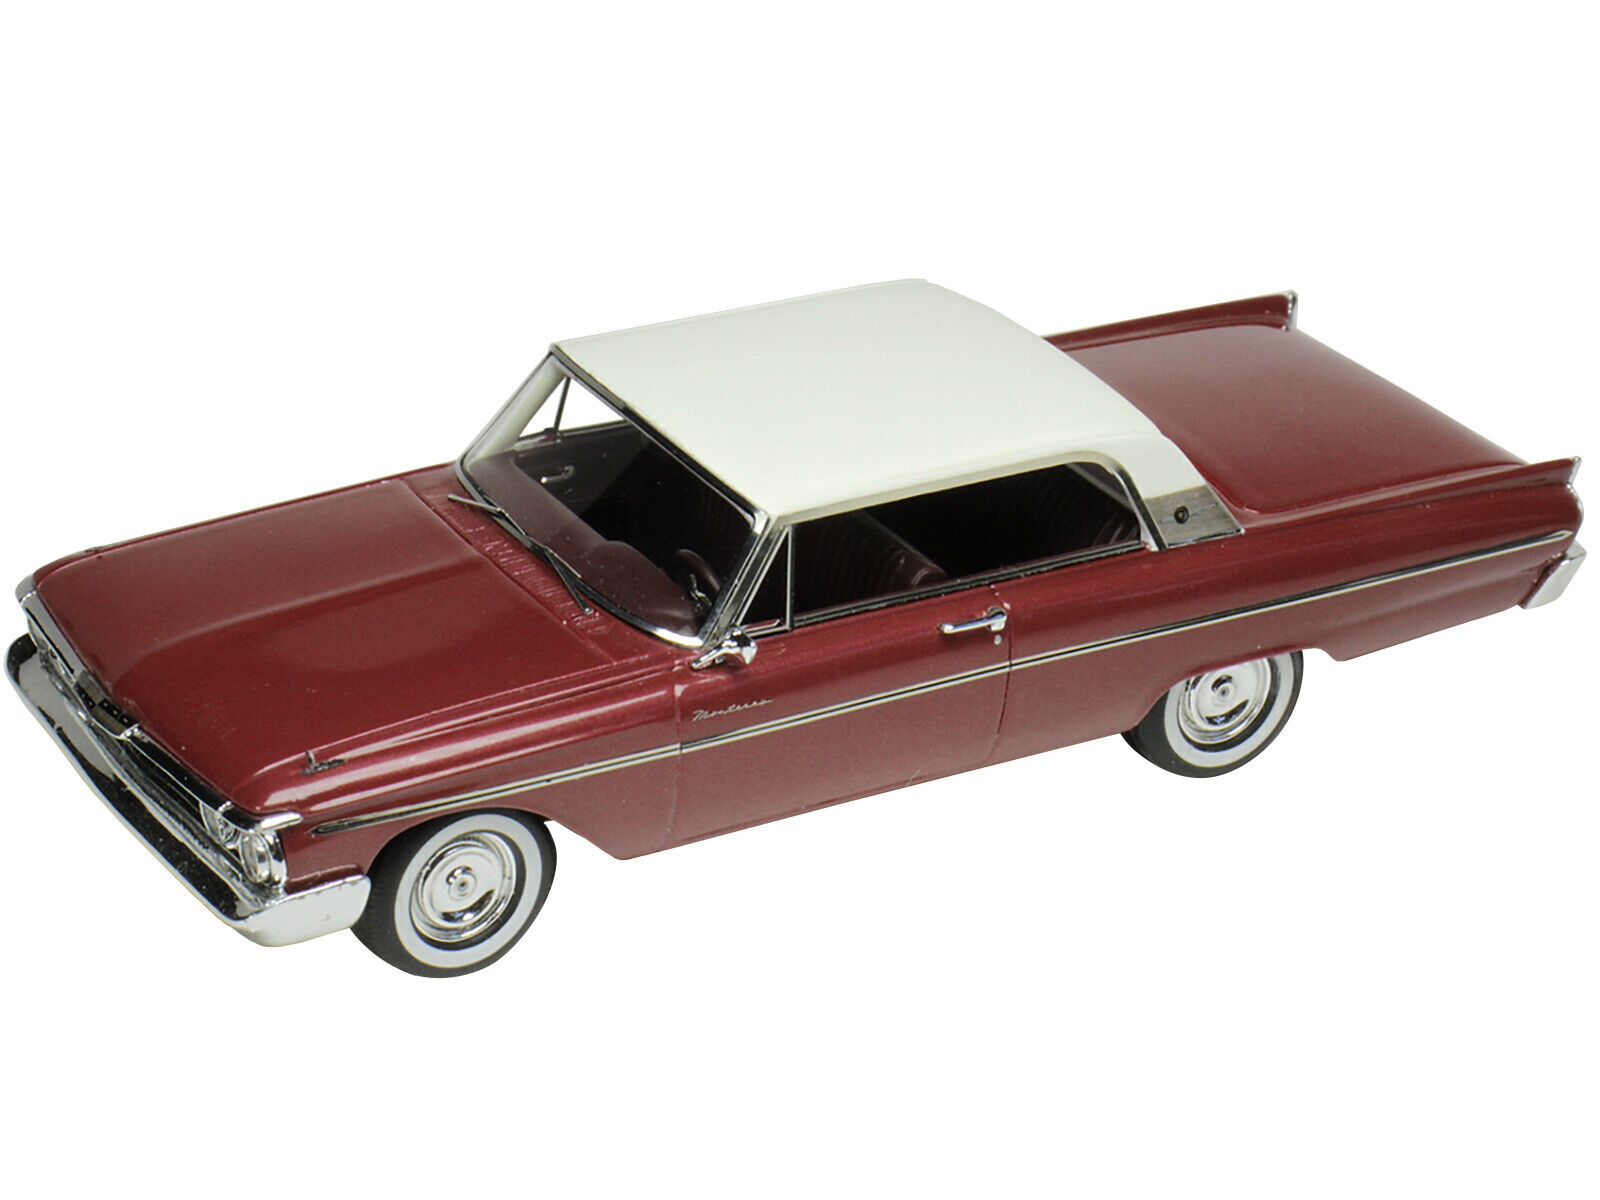 1961 Mercury Monterey Red Metallic with White Top Limited Edition to 210 pieces